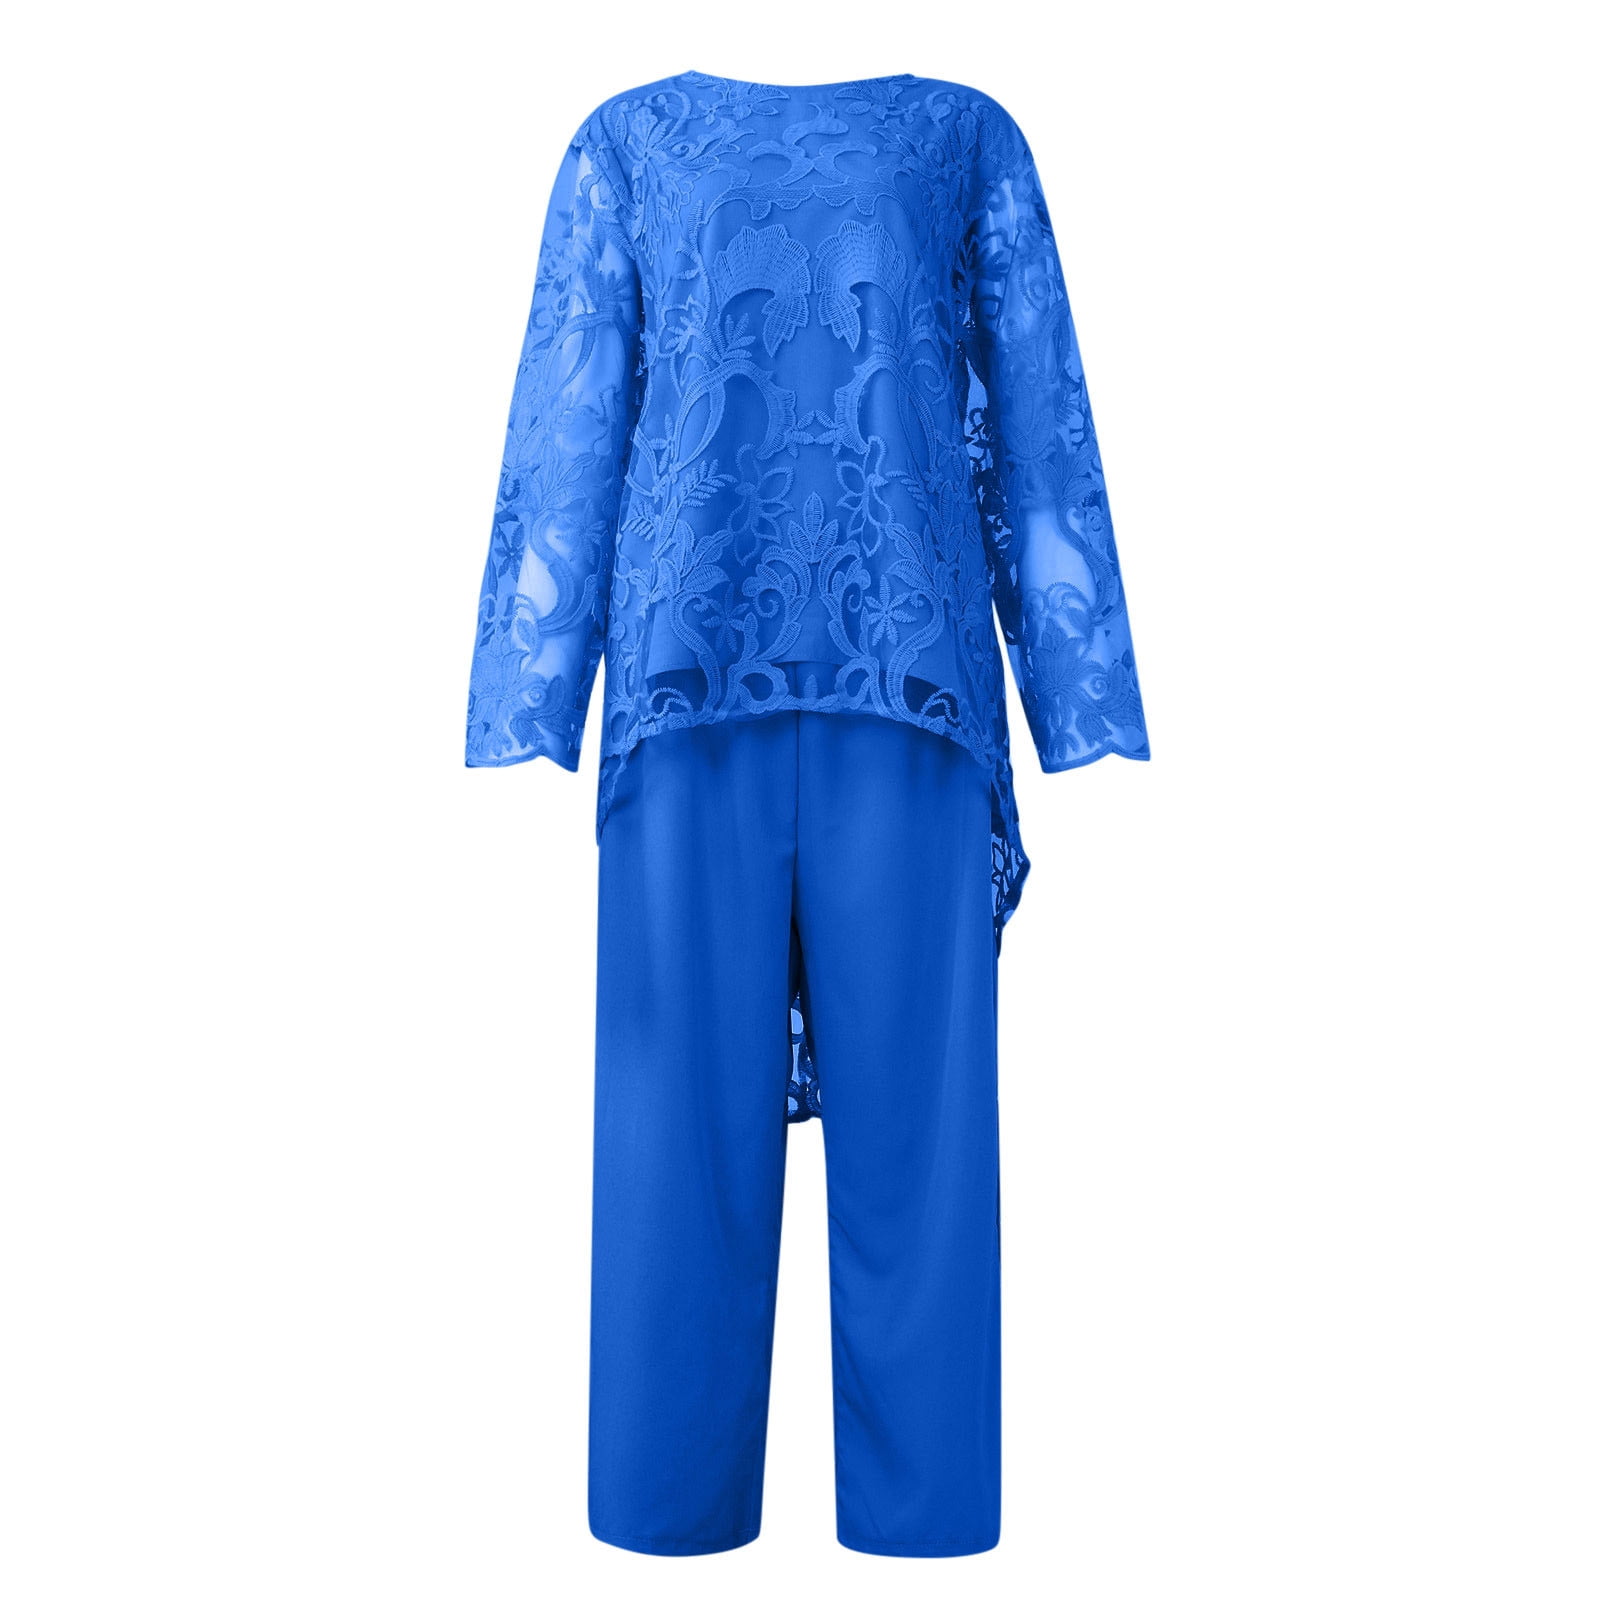 QUYUON Women Sets Elegant Formal Lace Mesh Long Sleeve Blouse Tops and Pants  Sets 2 Piece Outfits Women's Plus Size Wedding Party Loose Long Pants and Shirts  Two Piece Outfits Blue 4XL 